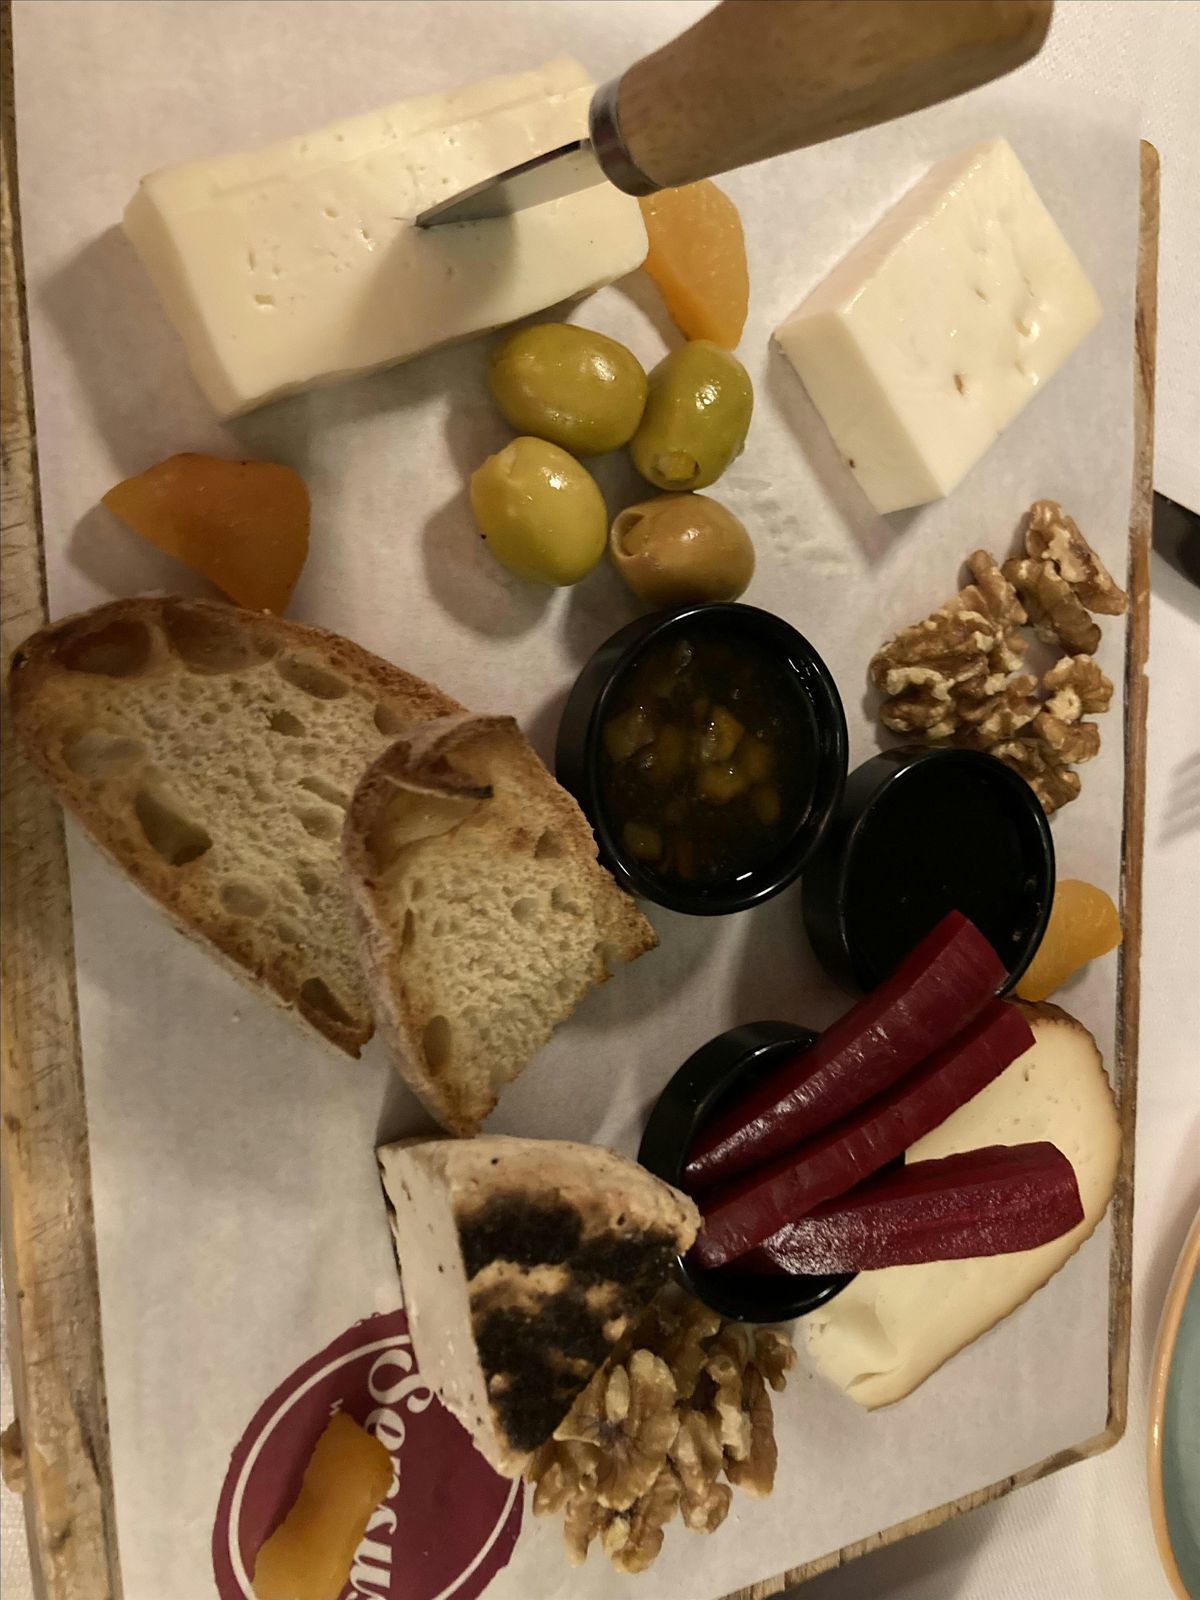 Cheese Tasting with Cheese and Bees